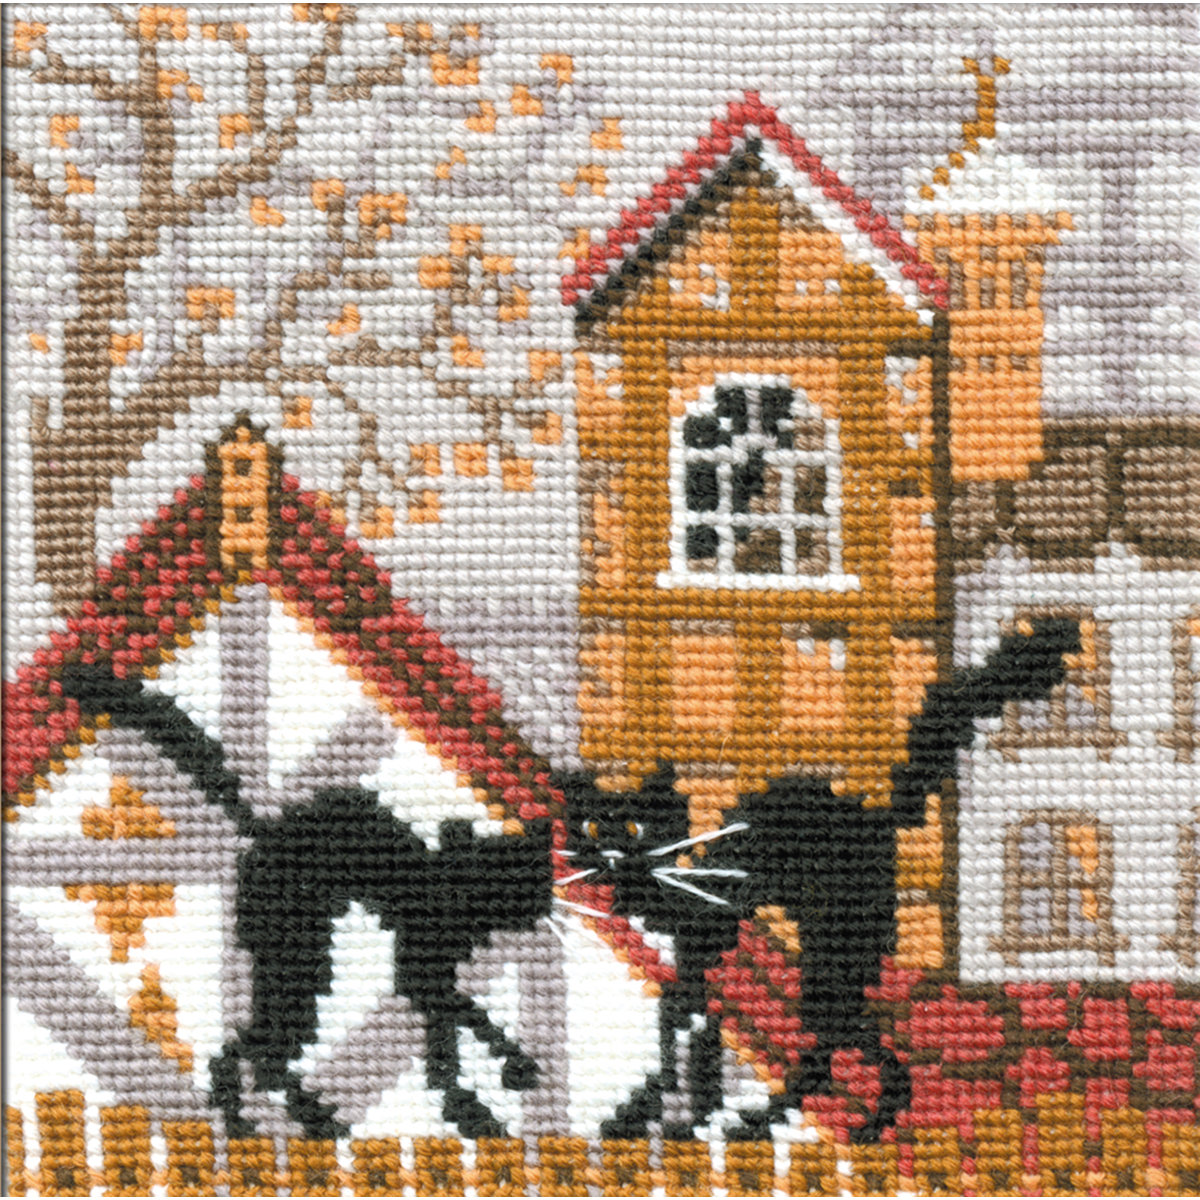 RIOLIS Counted Cross Stitch Kit 5"X5"-City & Cats Autumn (15 Count)